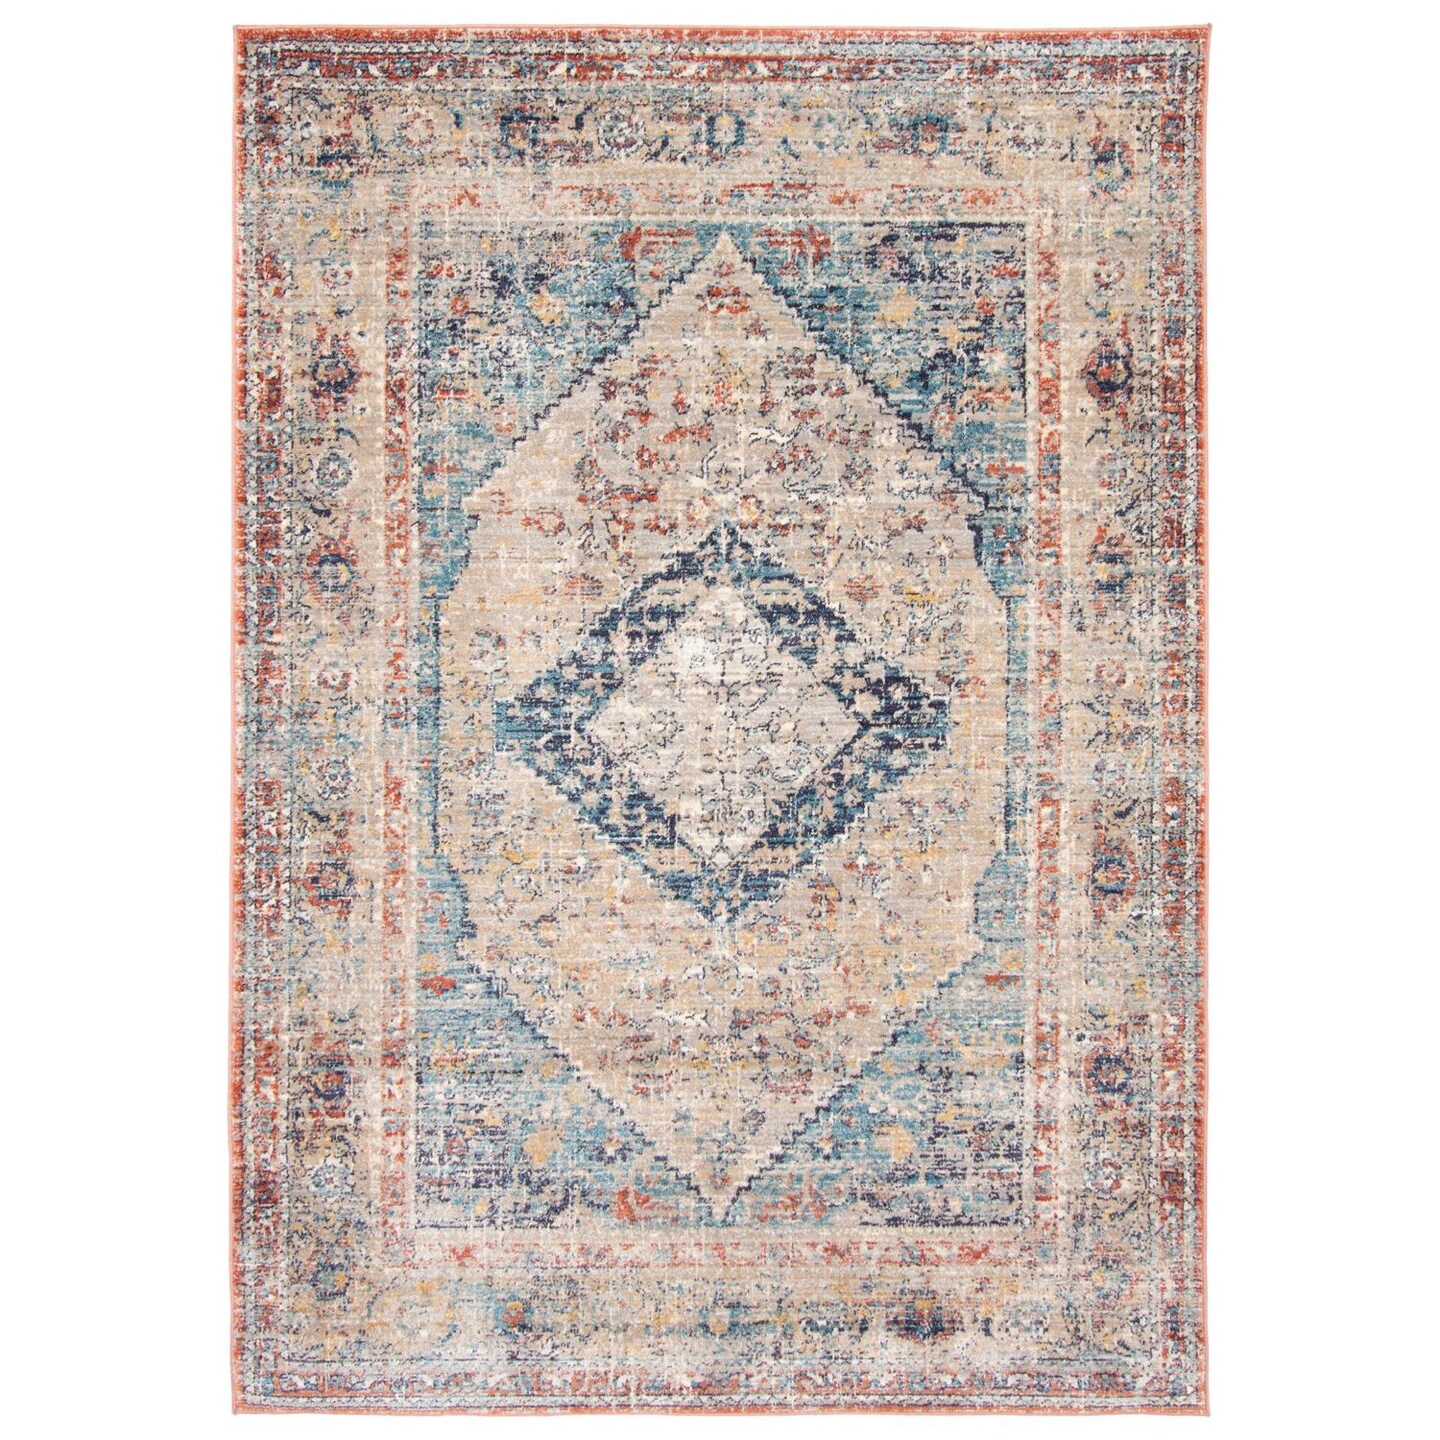 Chaudhary Living Distressed Medallion Rectangular Area Throw Rug - 5&#x27; x 8&#x27; - Red and Blue